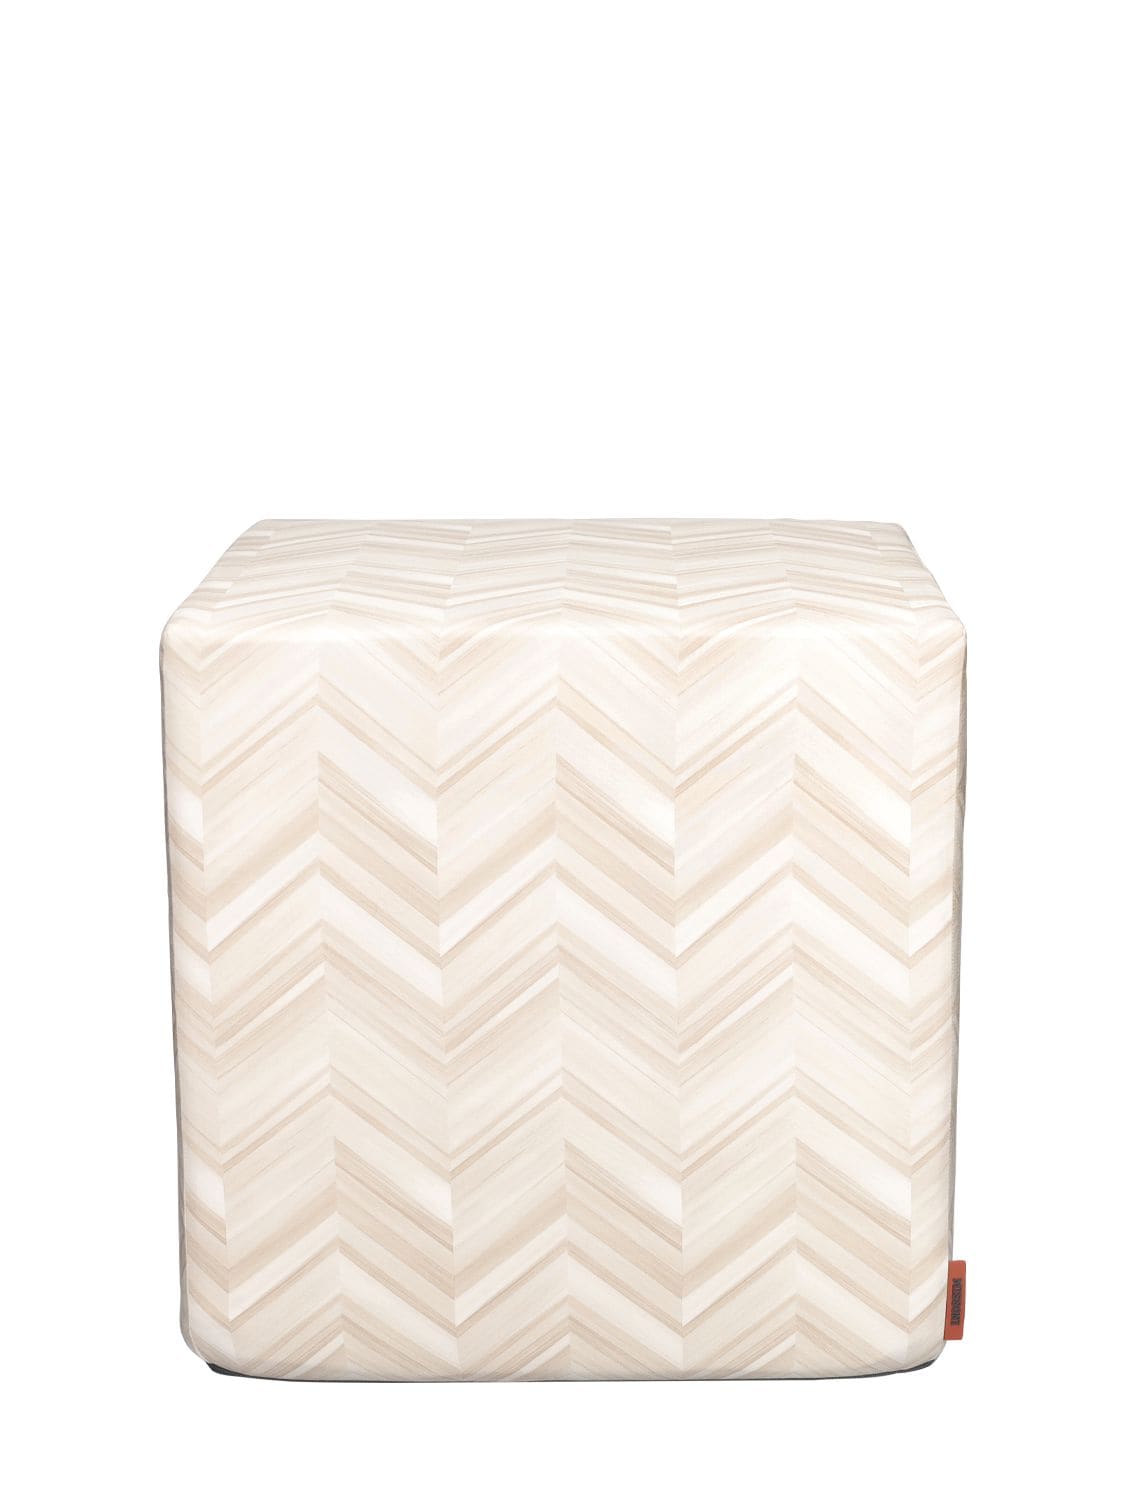 Image of Layers Inlay Cube Pouf